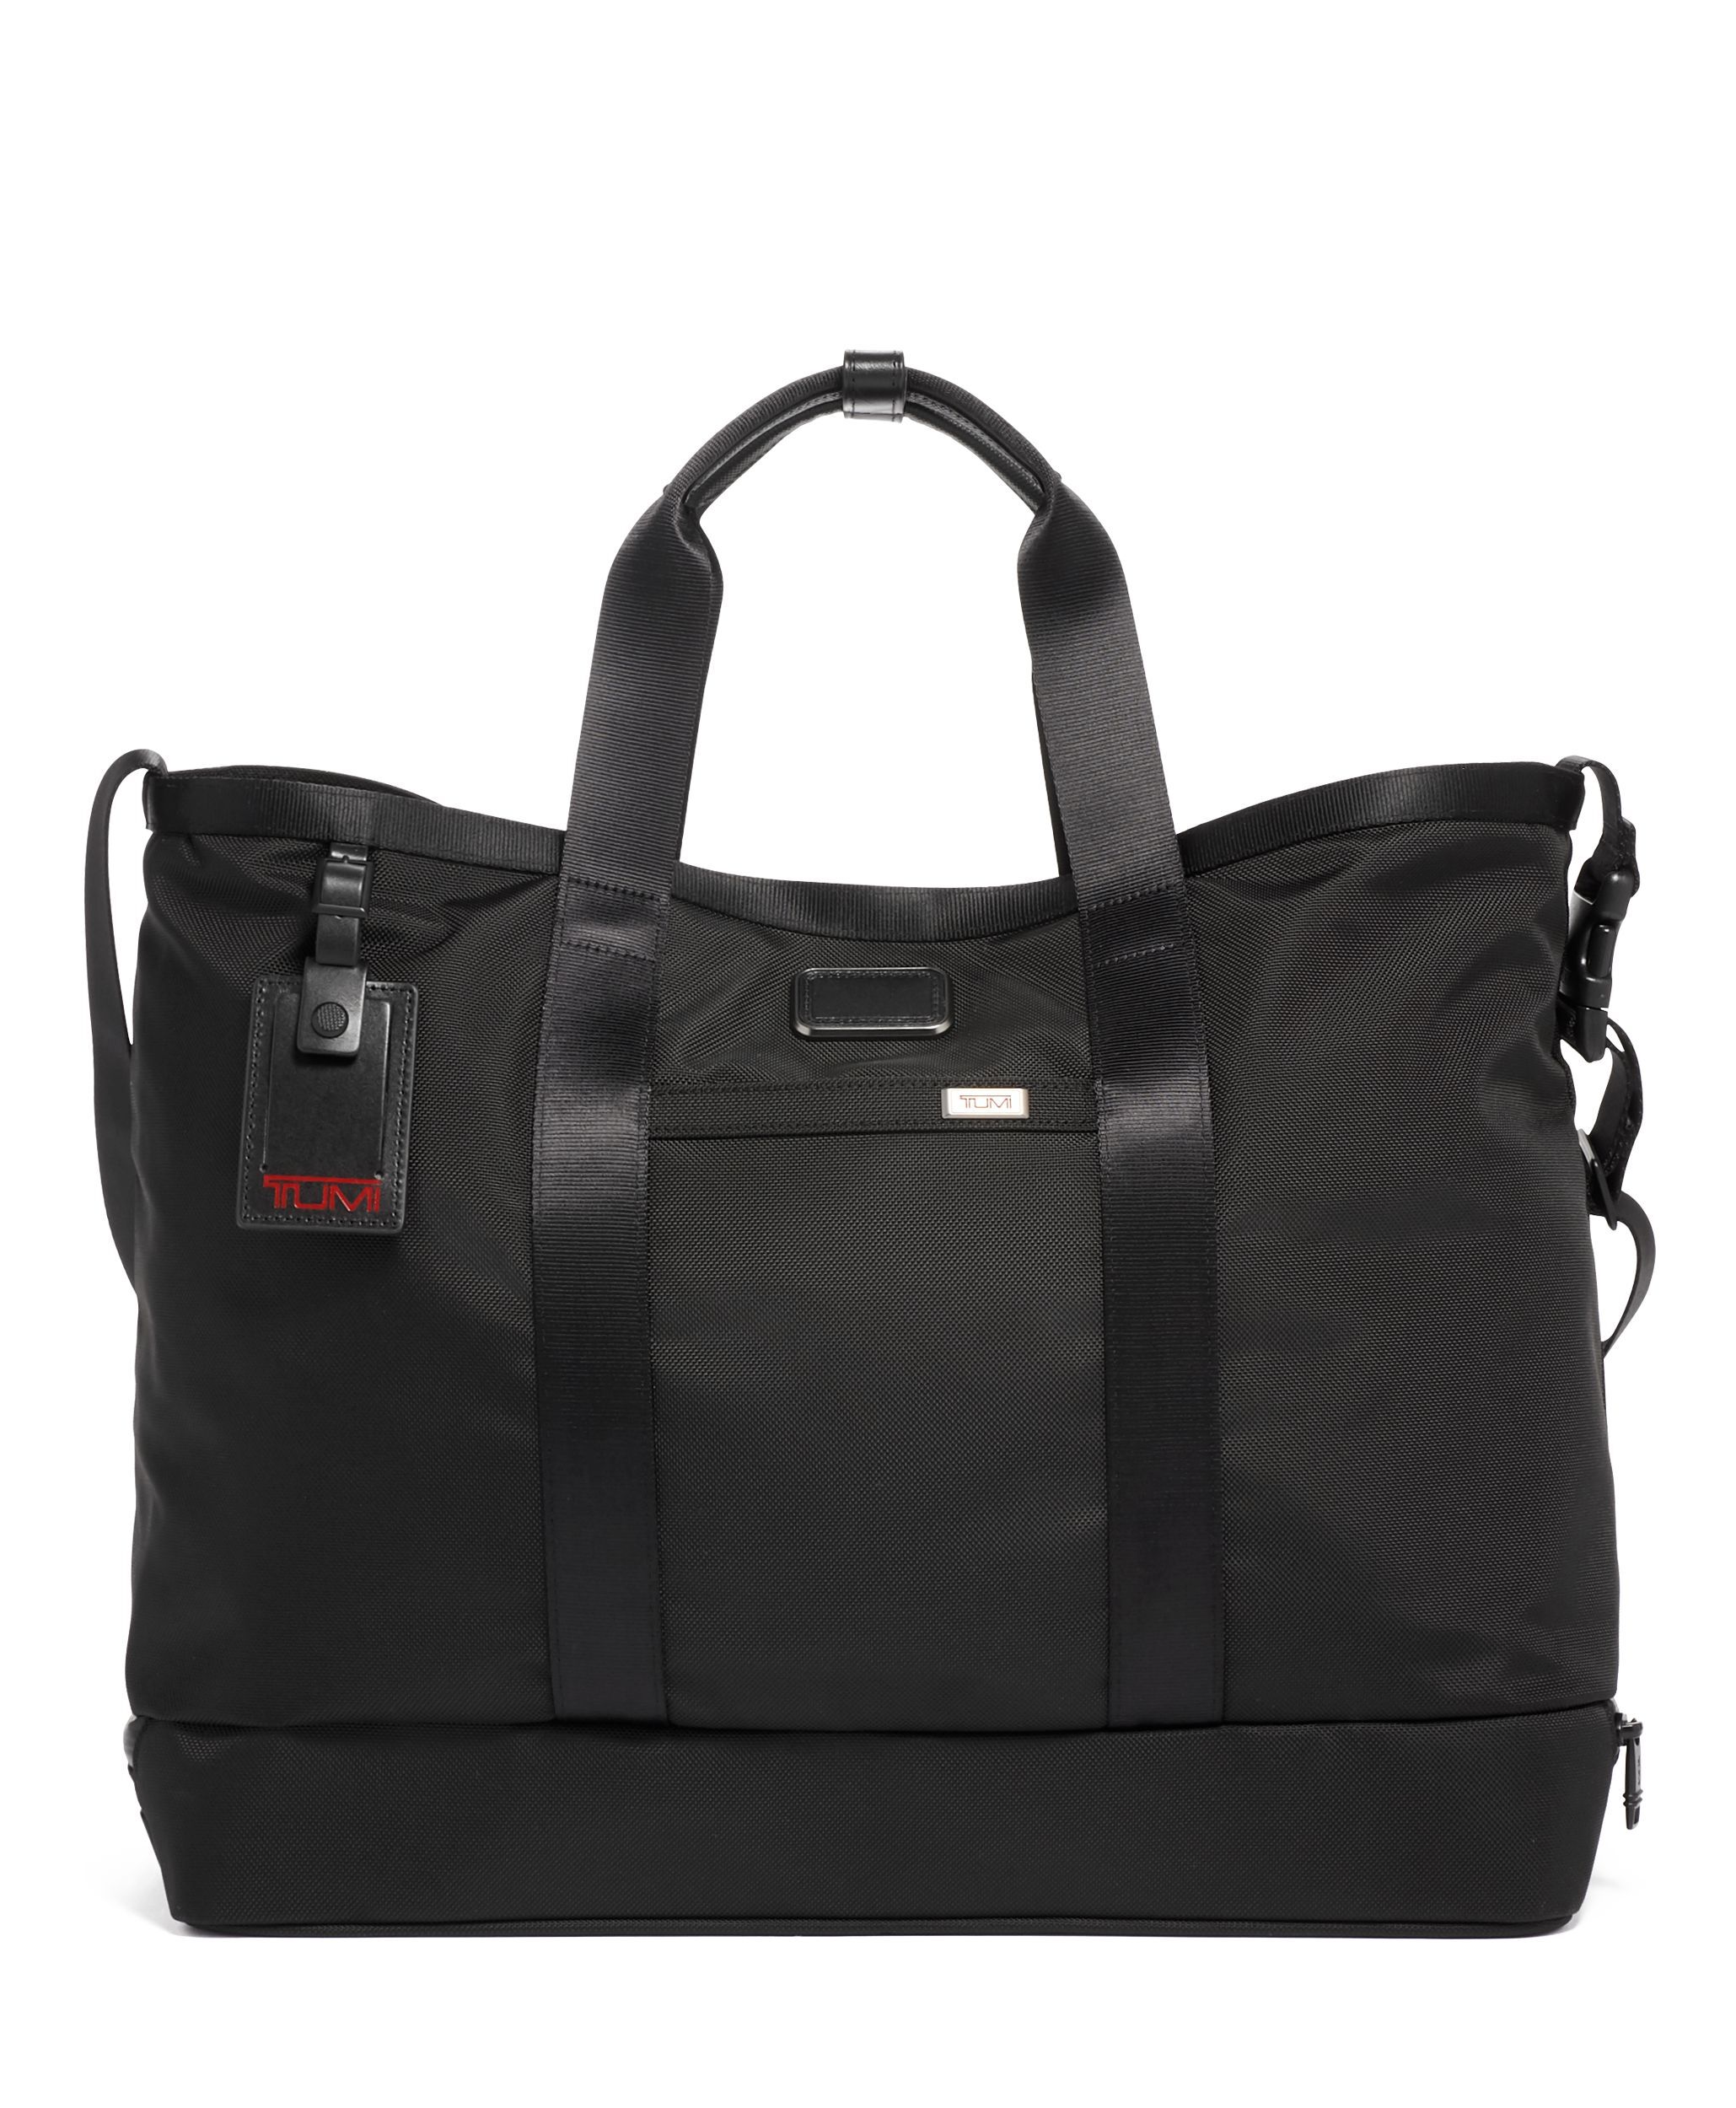 ALPHA CARRYALL TOTE